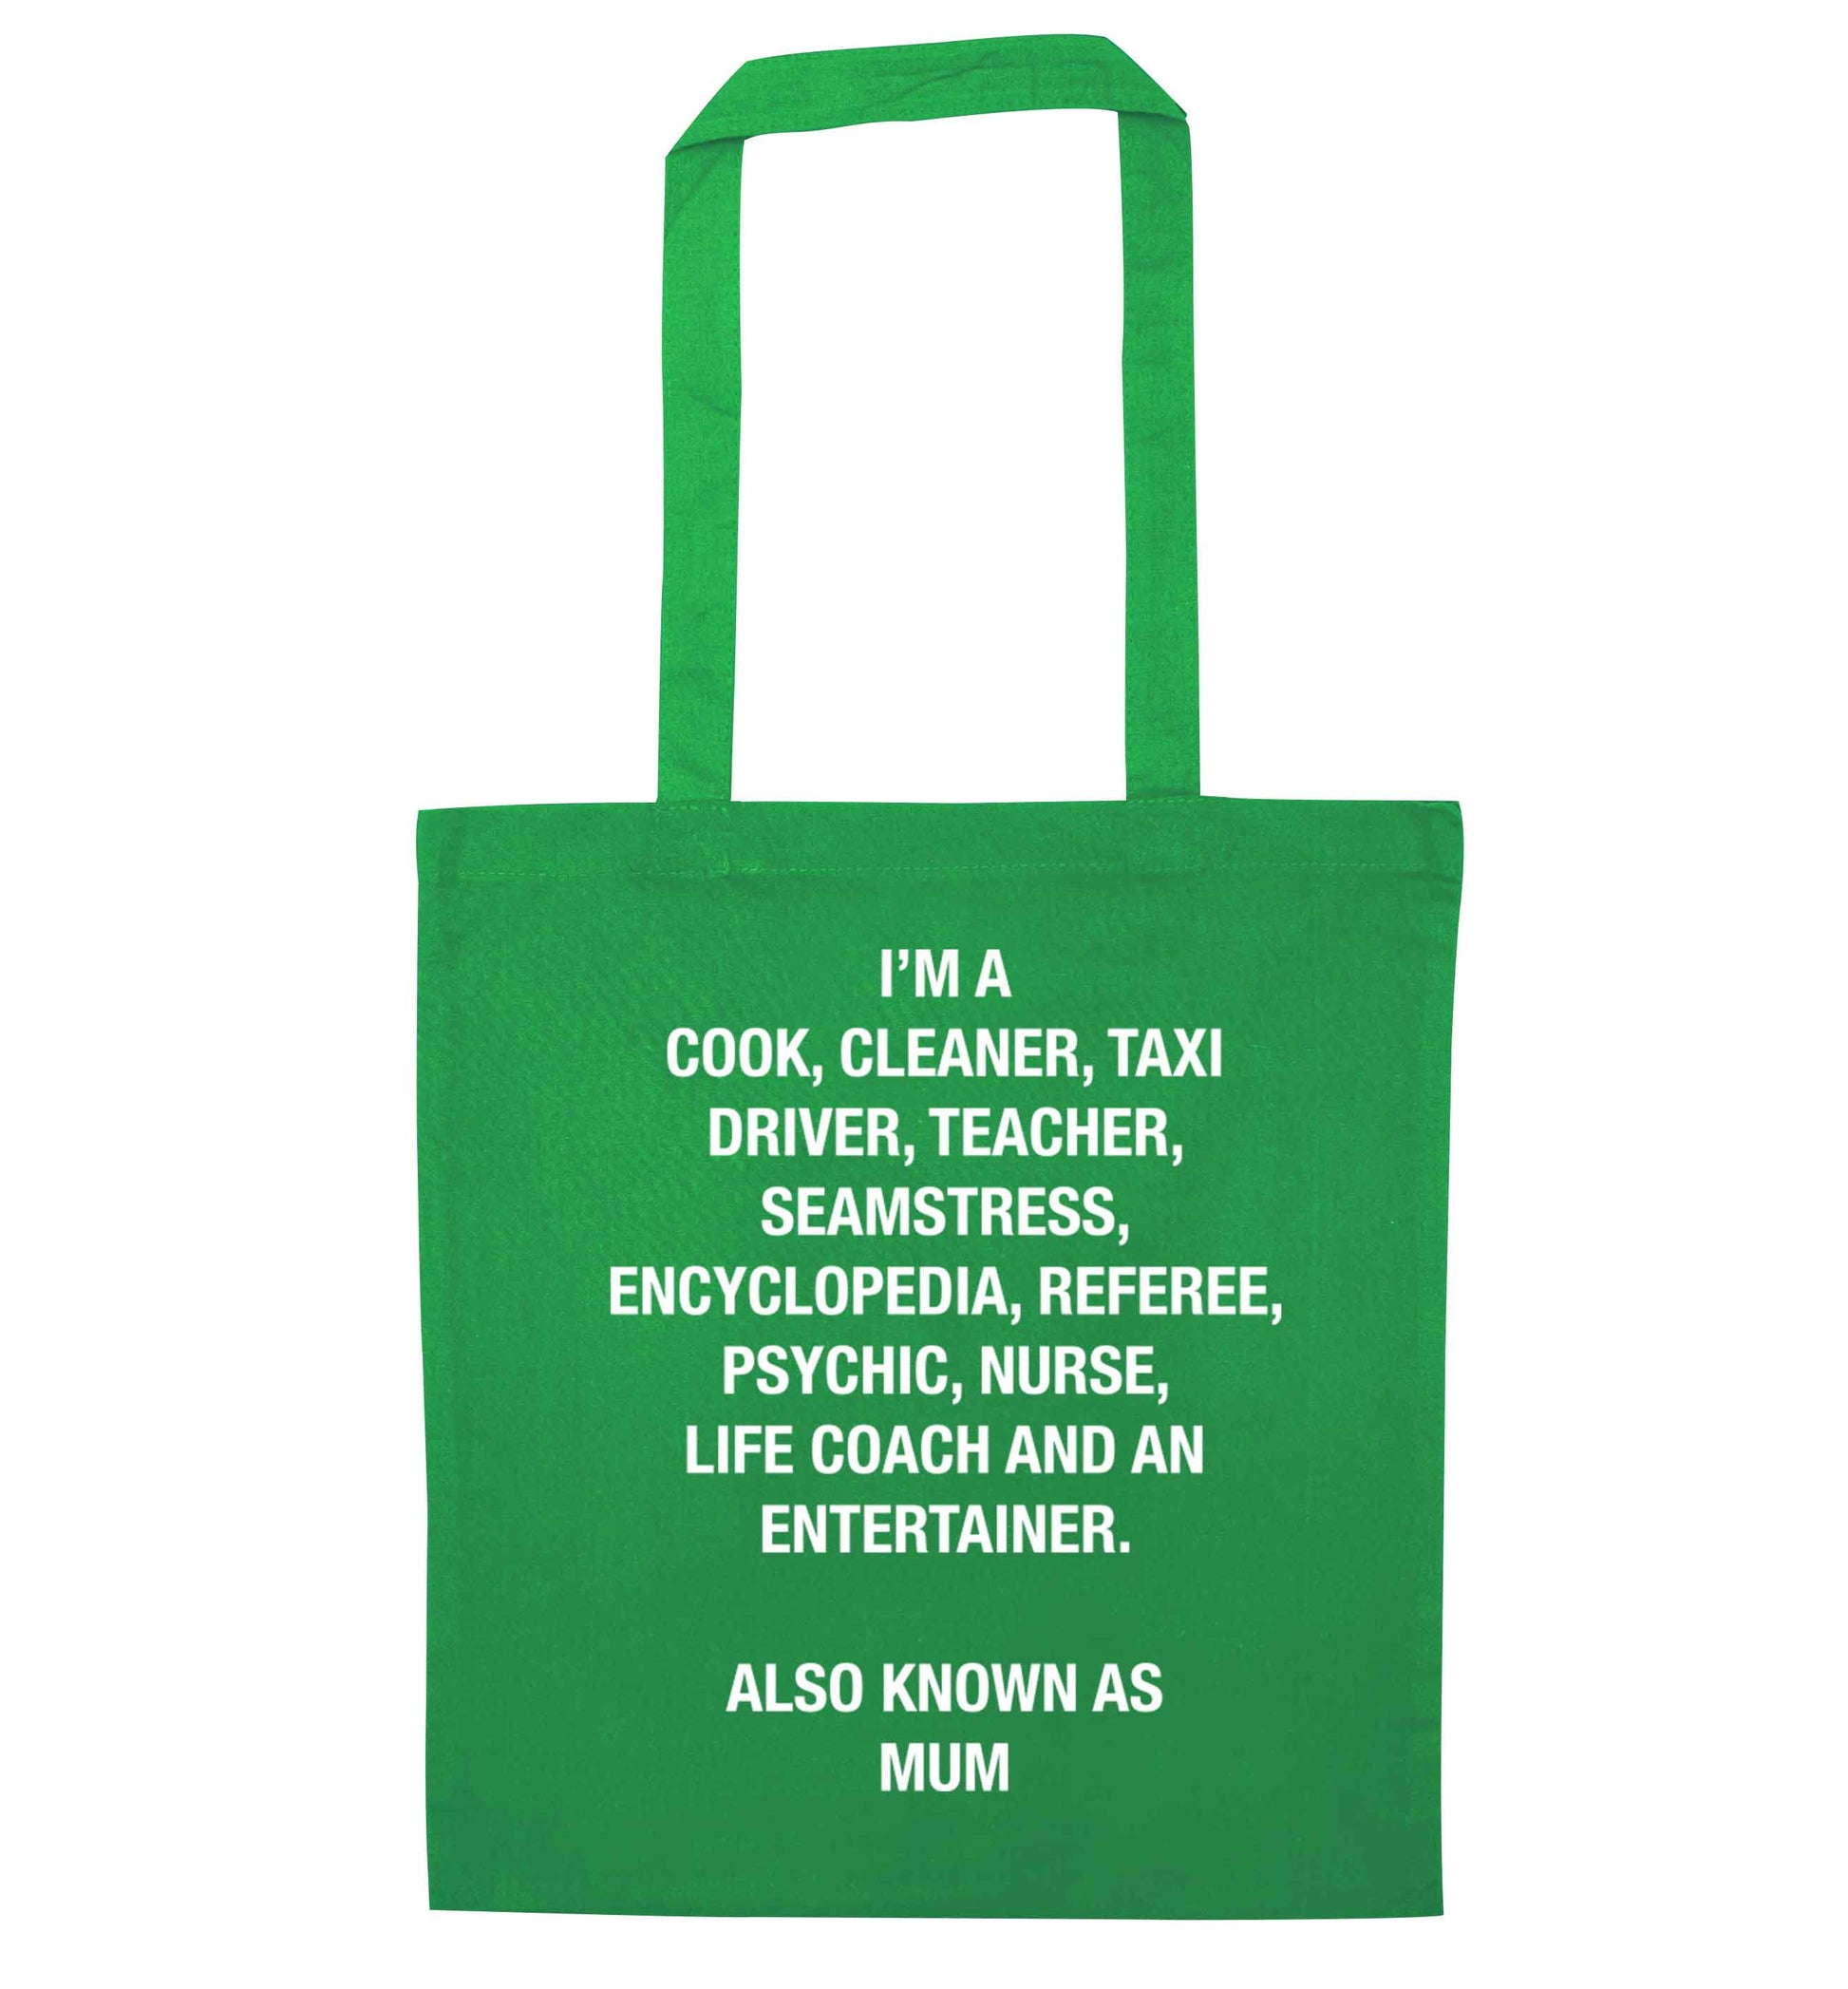 Funny gifts for your mum on mother's dayor her birthday! Mum, cook, cleaner, taxi driver, teacher, seamstress, encyclopedia, referee, psychic, nurse, life coach and entertainer green tote bag